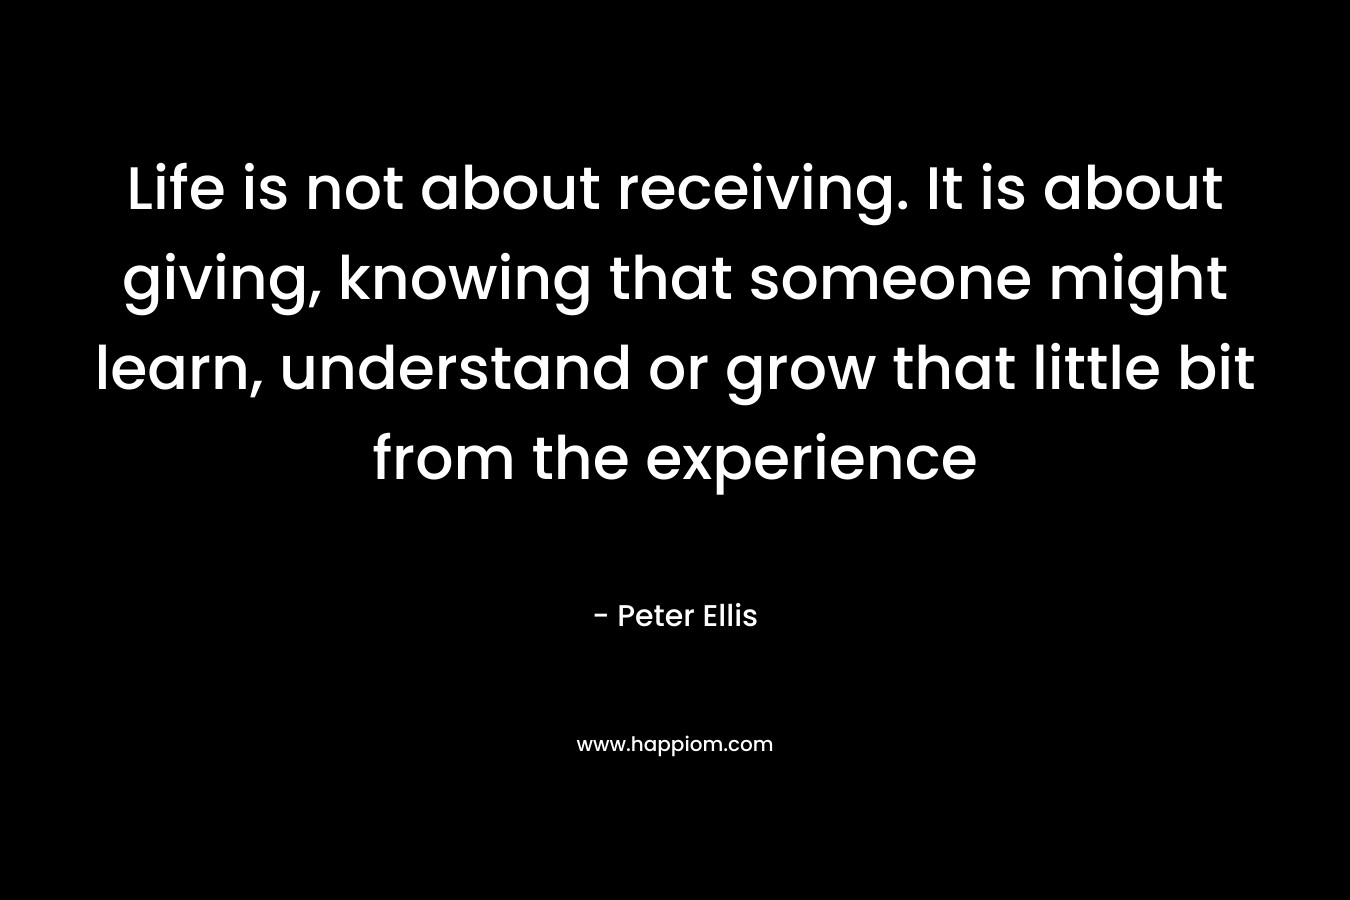 Life is not about receiving. It is about giving, knowing that someone might learn, understand or grow that little bit from the experience